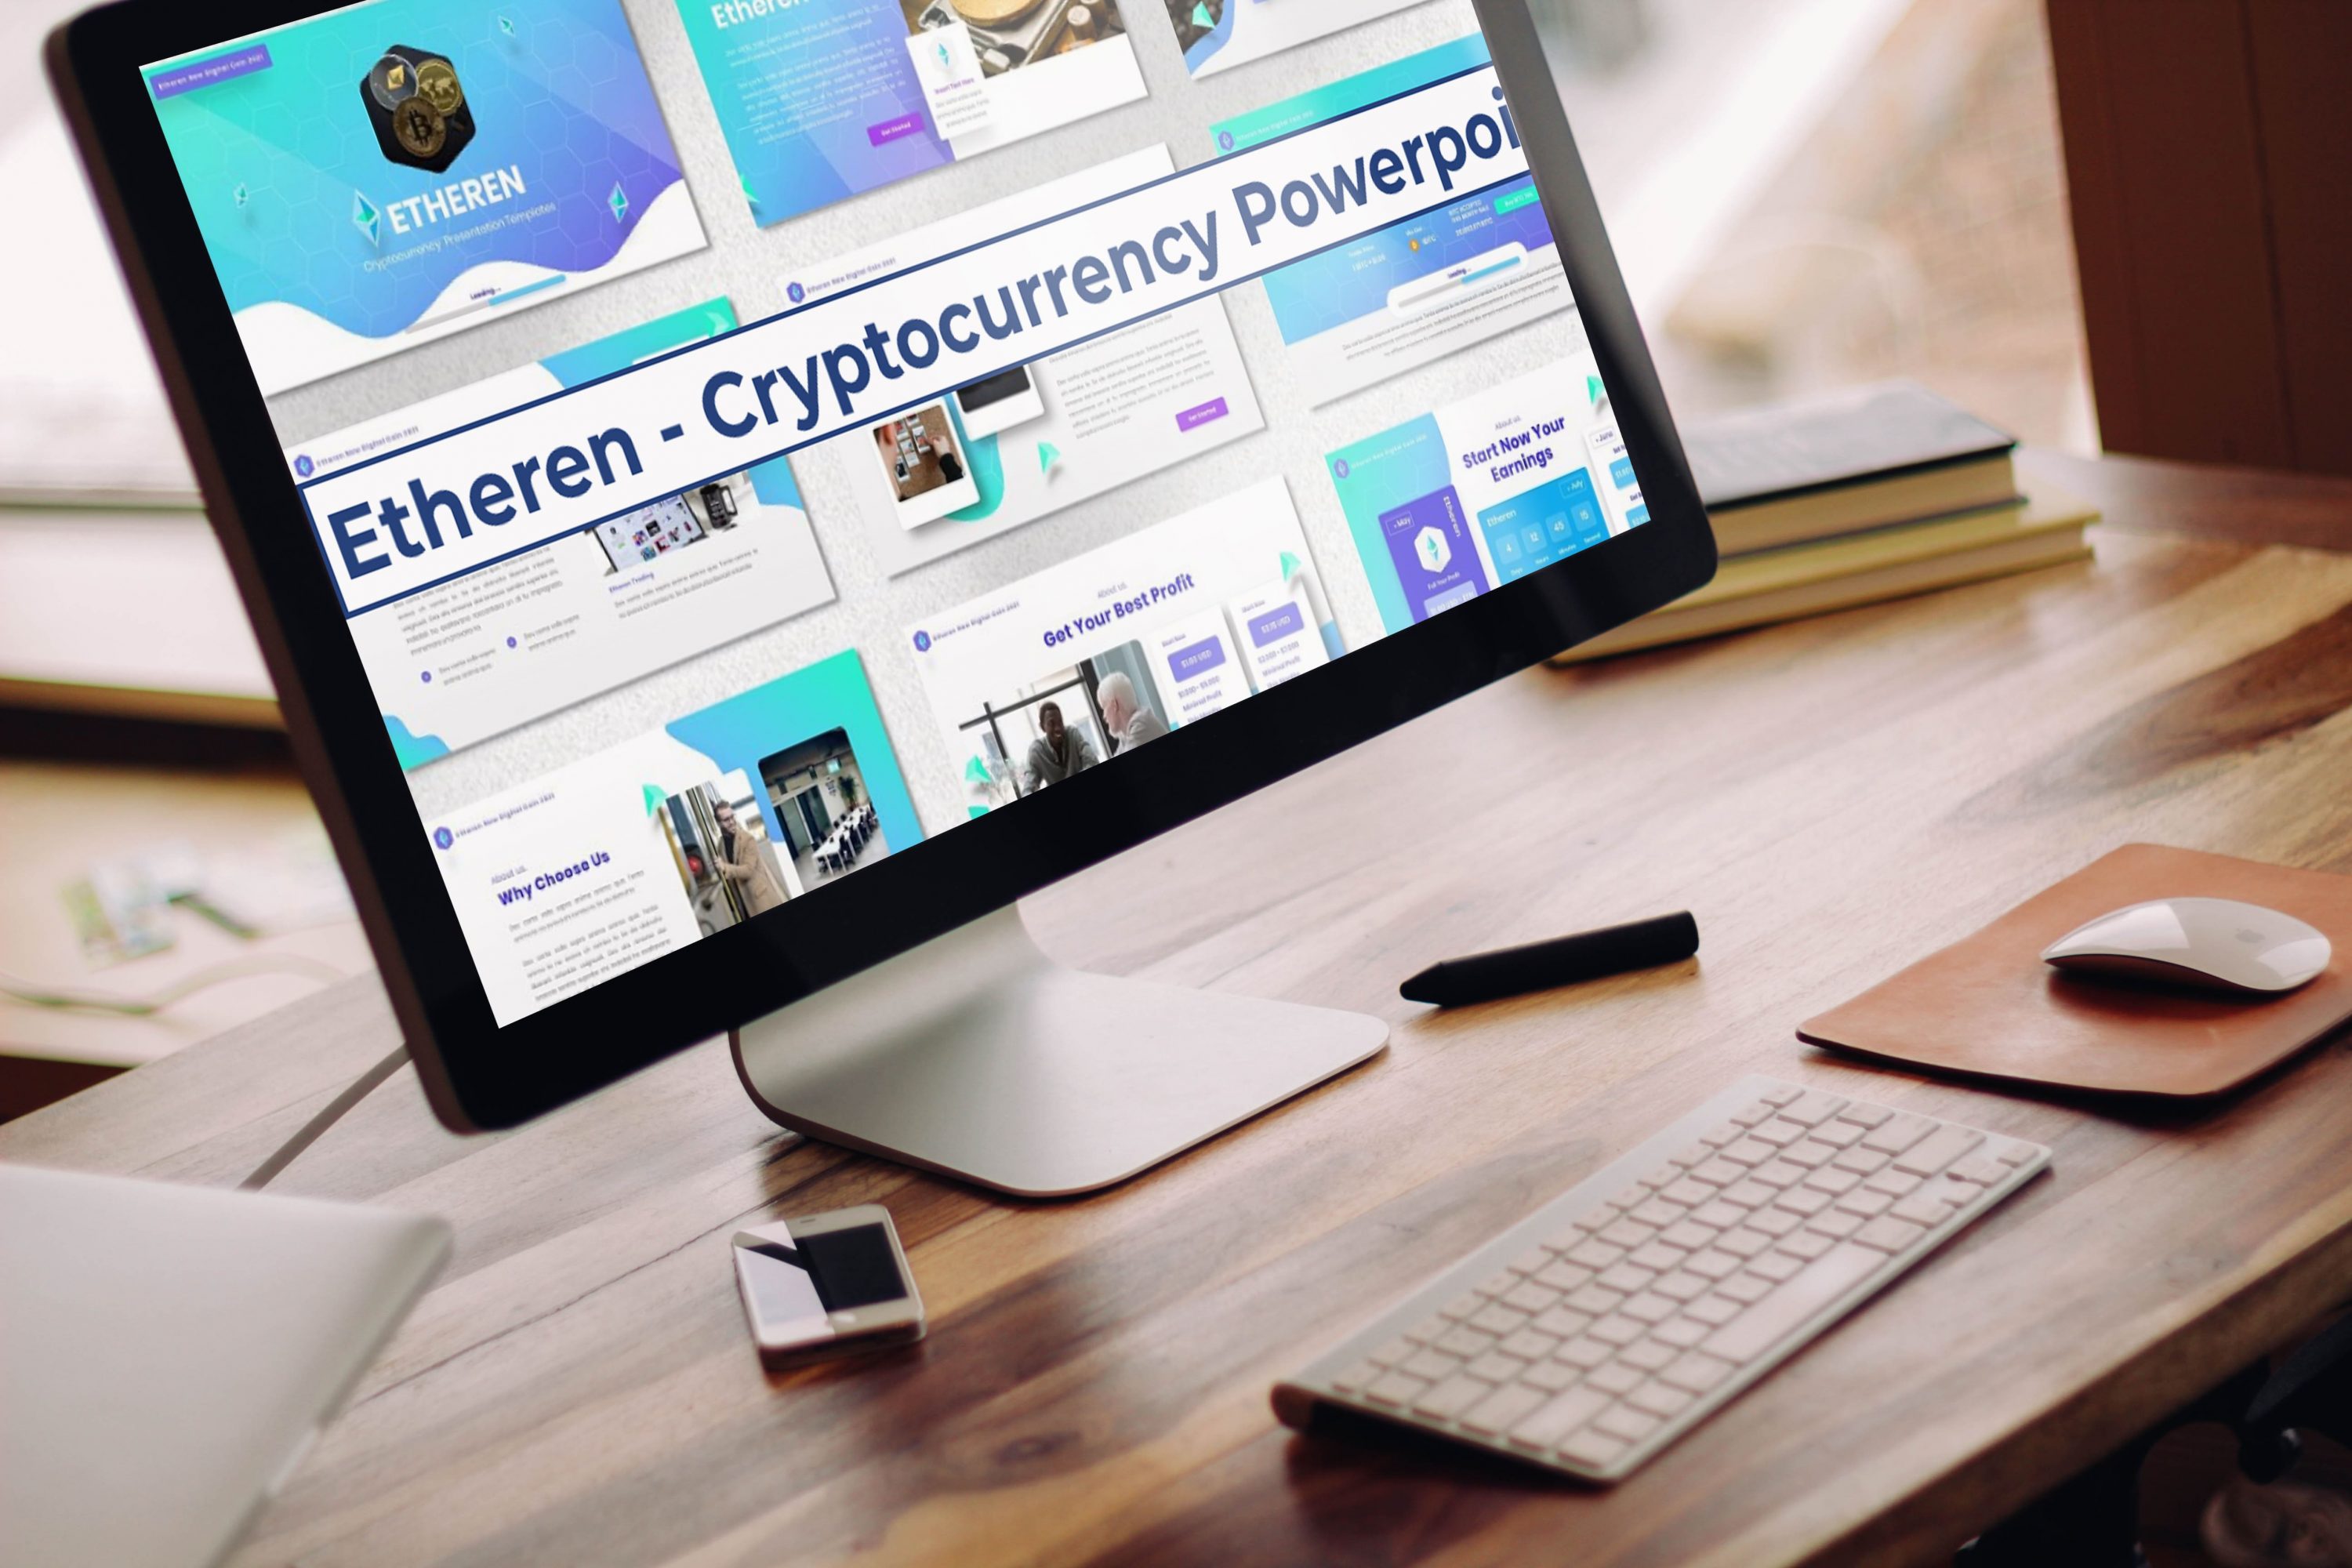 Desktop option of the Etheren - Cryptocurrency Powerpoint.